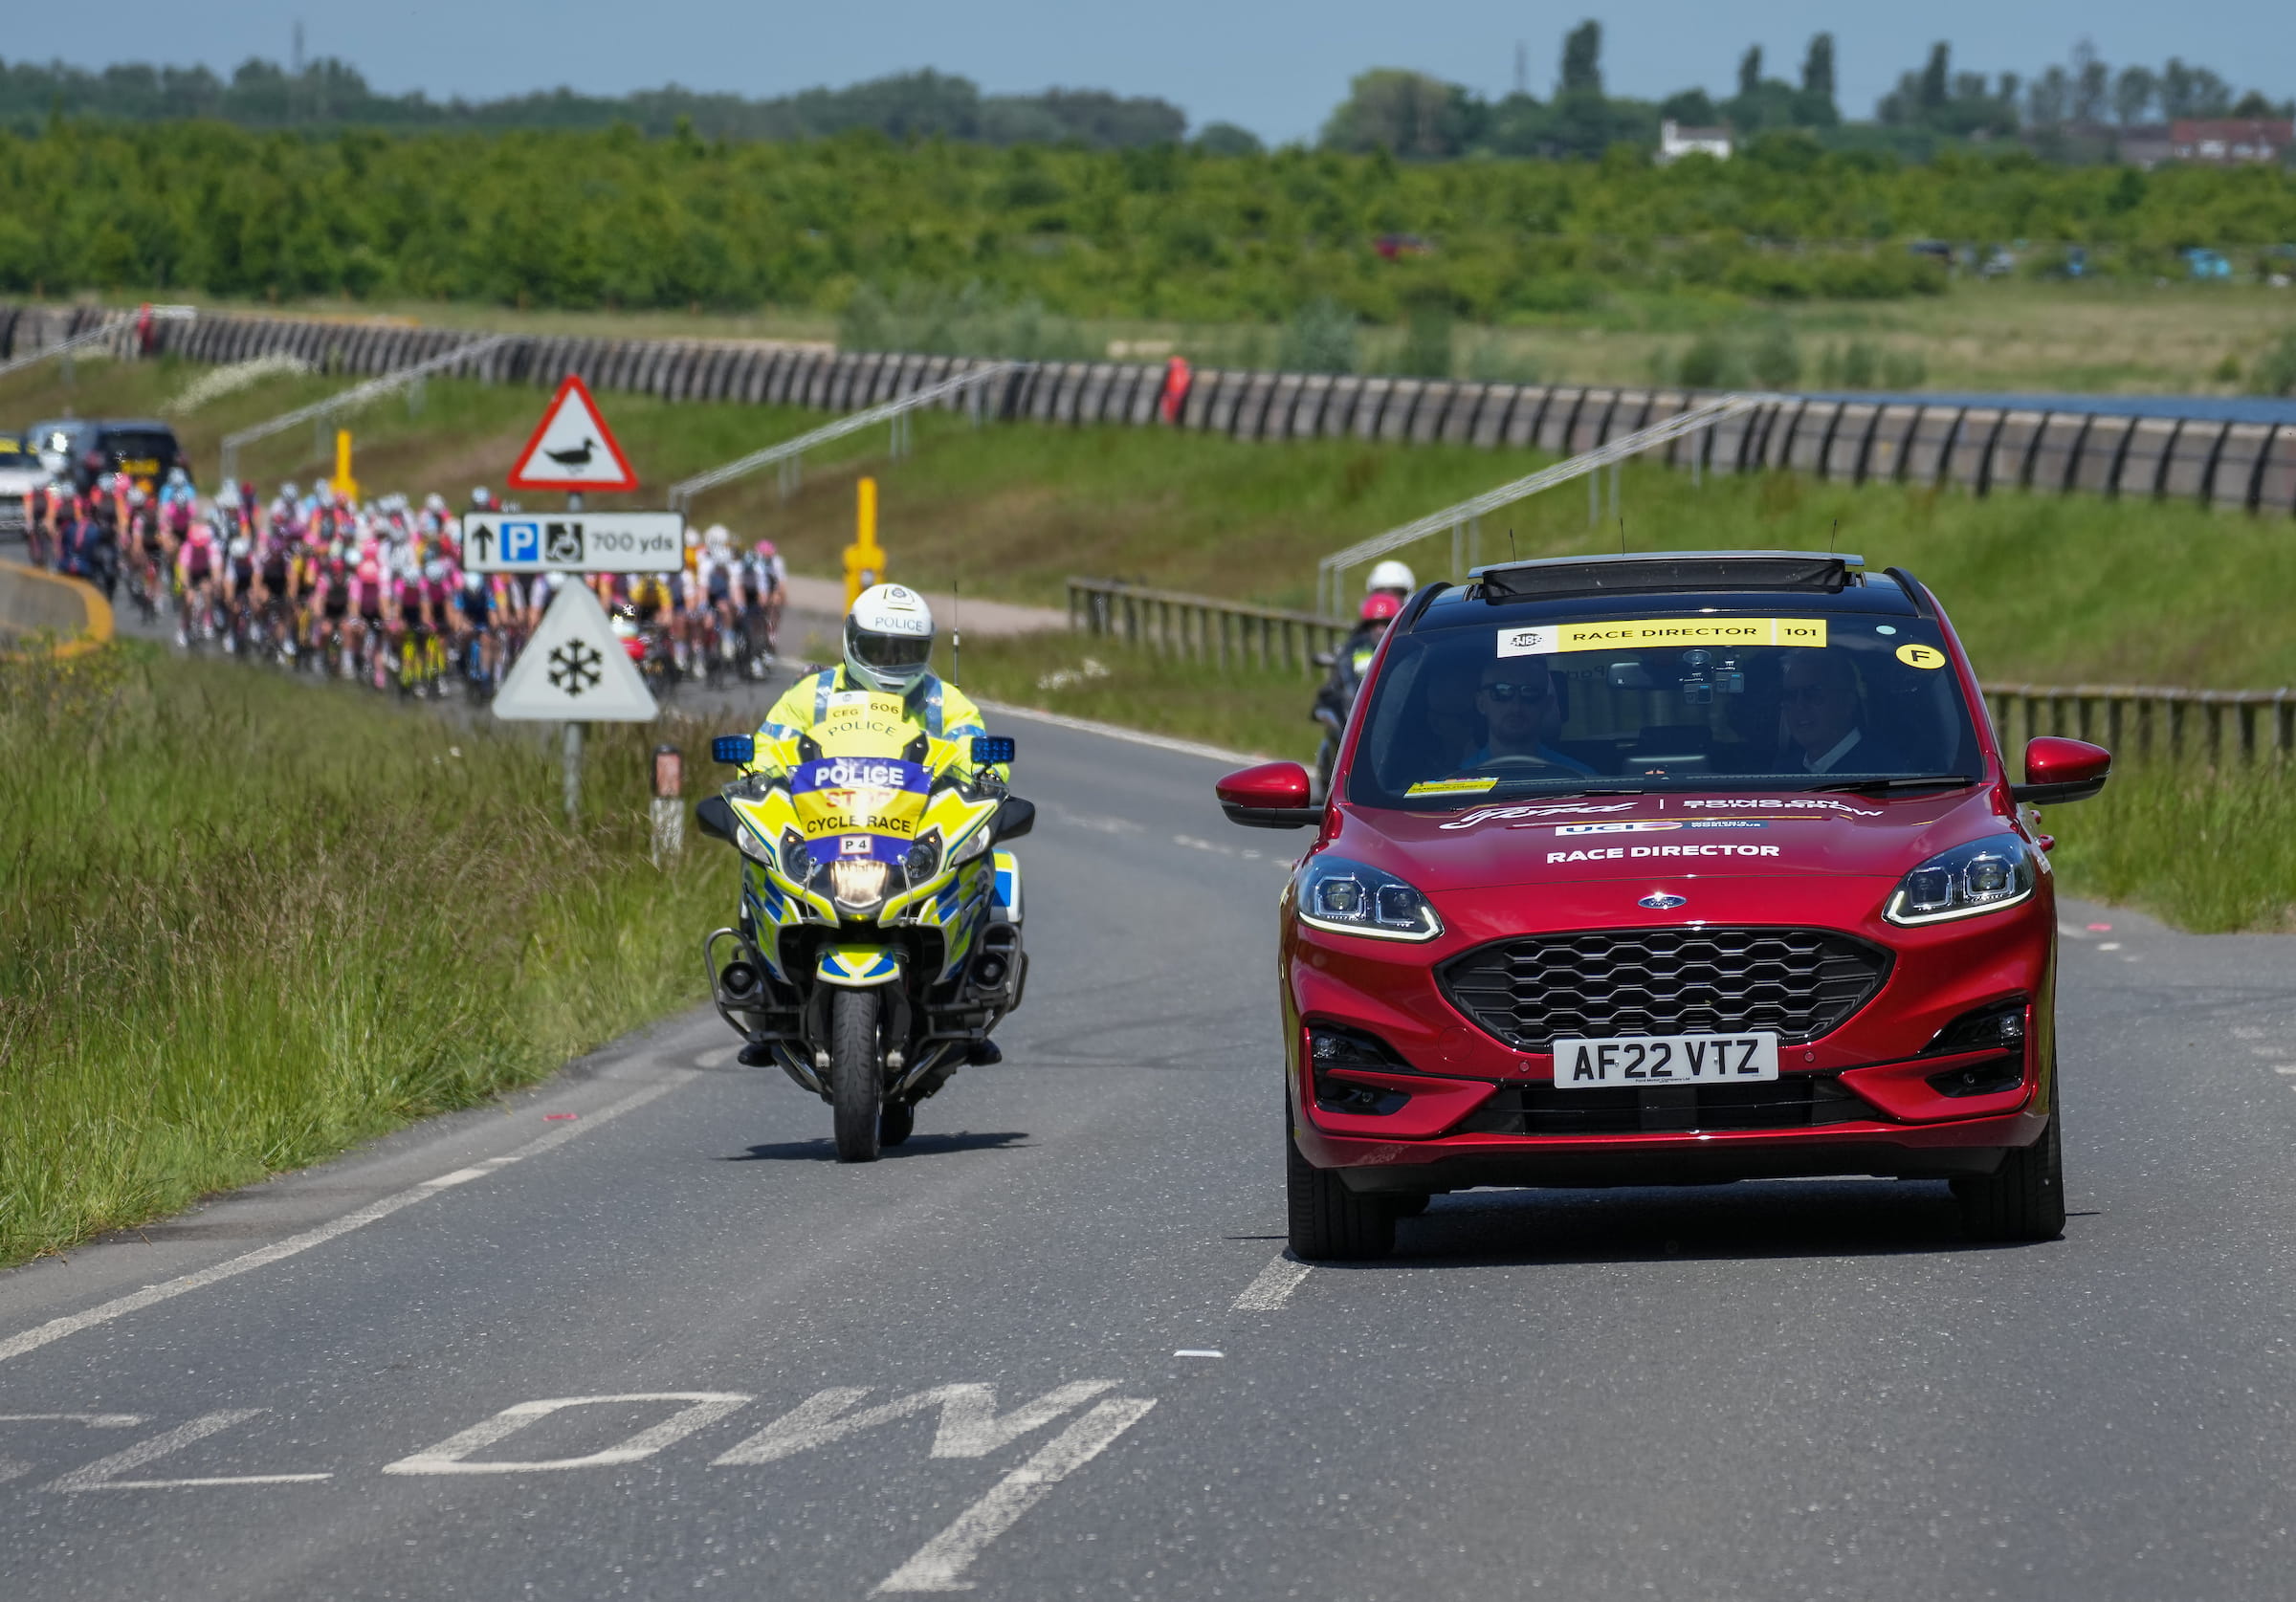 A police motorcycle and car drive ahead of a peloton of cyclists